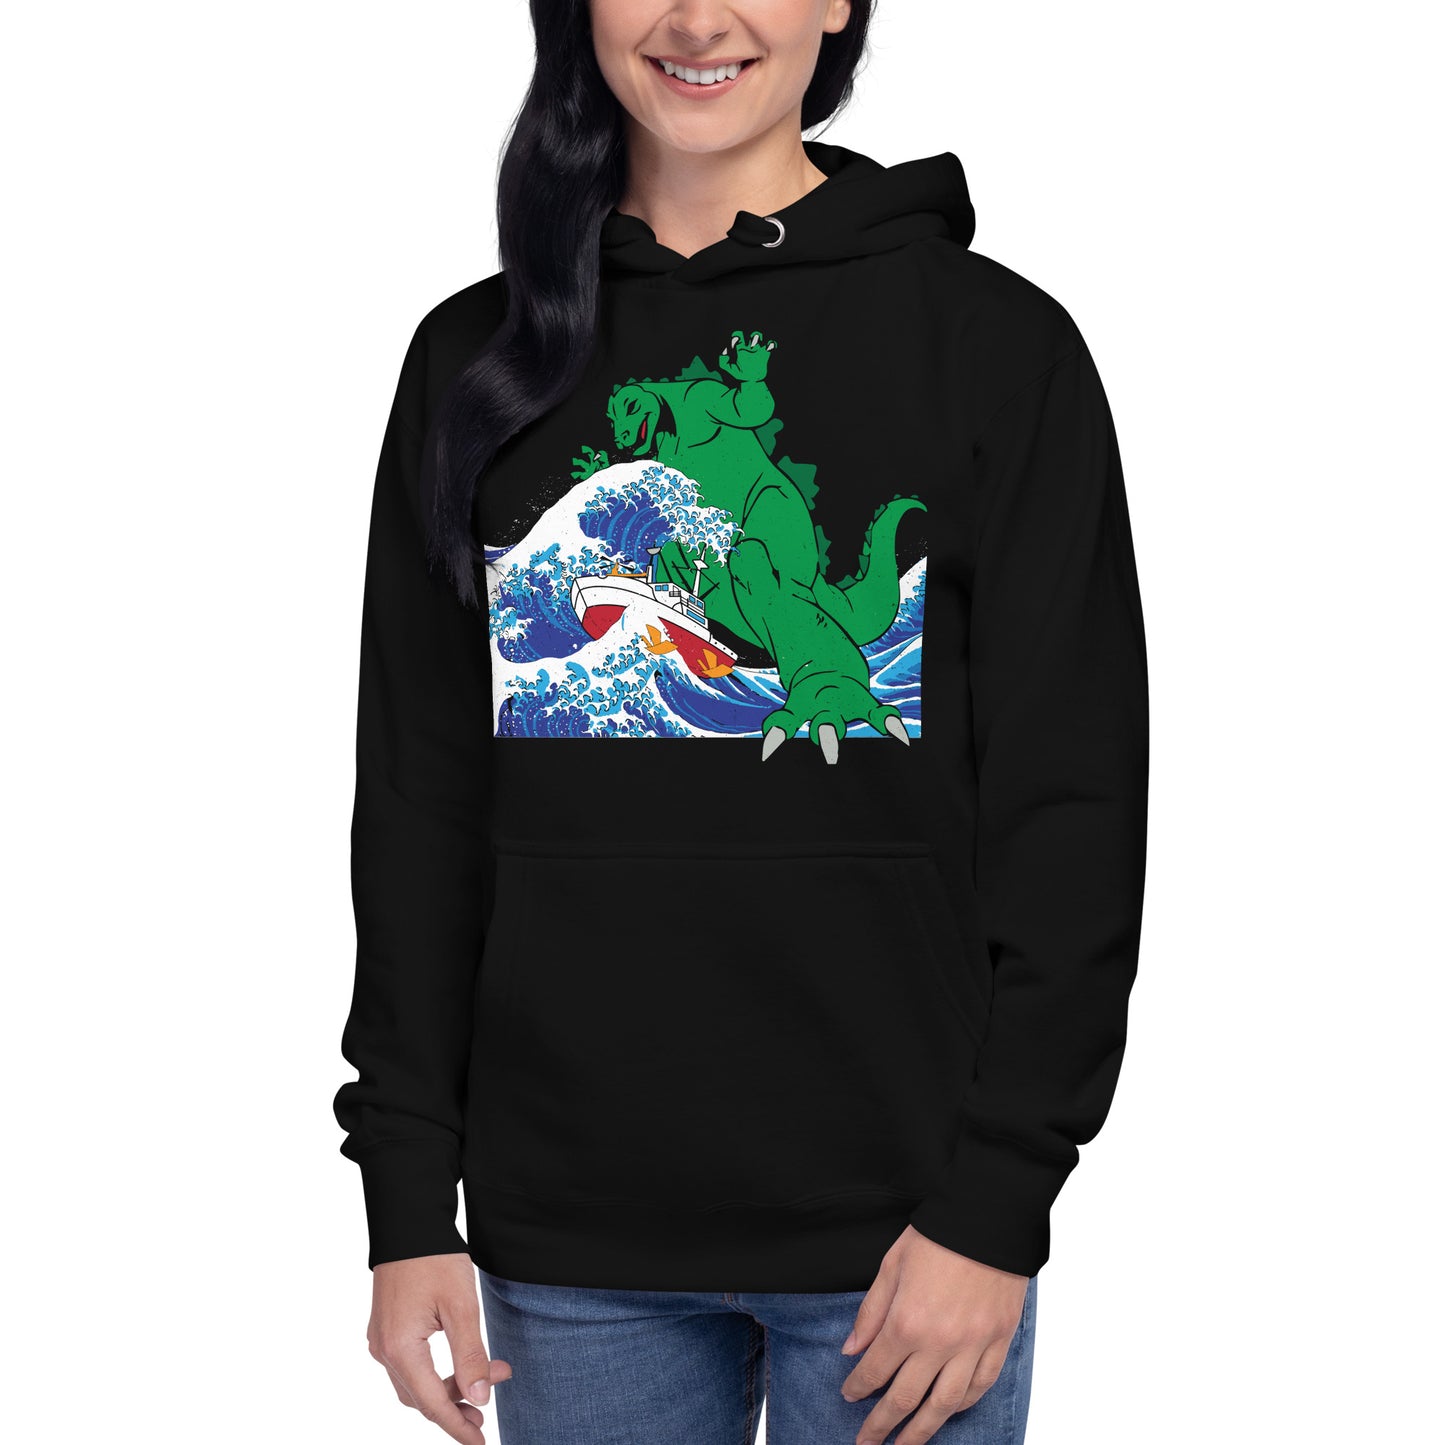 Calico in Trouble - Unisex Hoodie